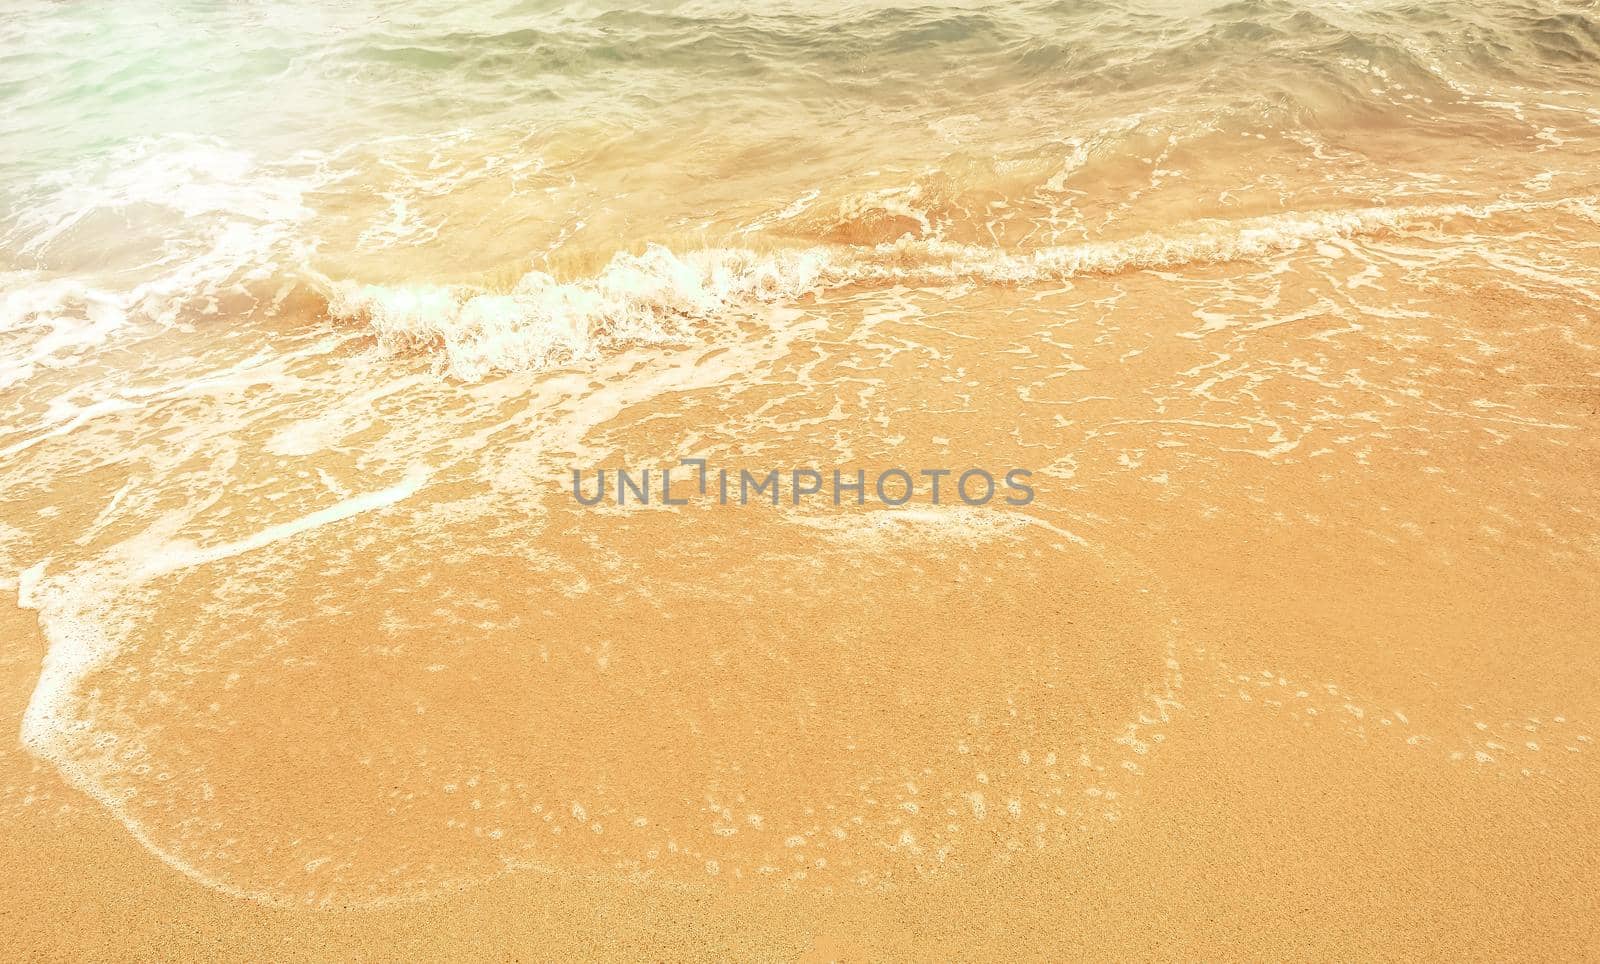 Magnificent summer sea abstract beach background with Golden sand, white foam, blue ocean and sunlight.